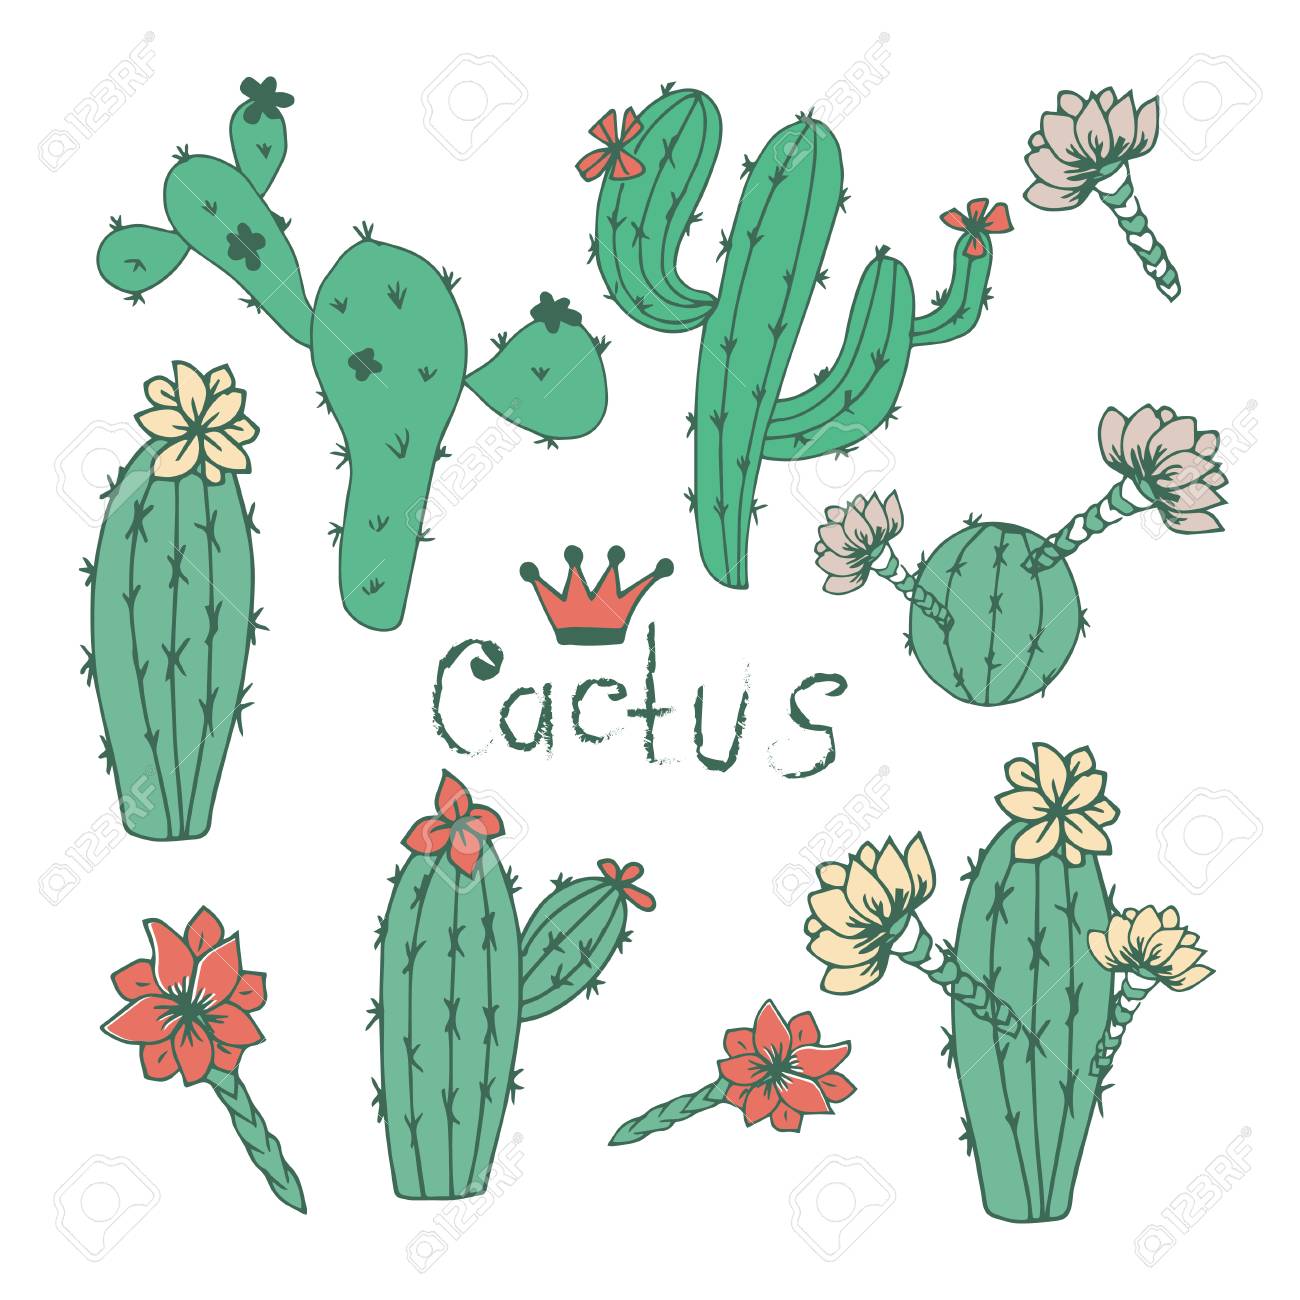 Cactus Peyote Set On A White Background Sketch Doodle Royalty